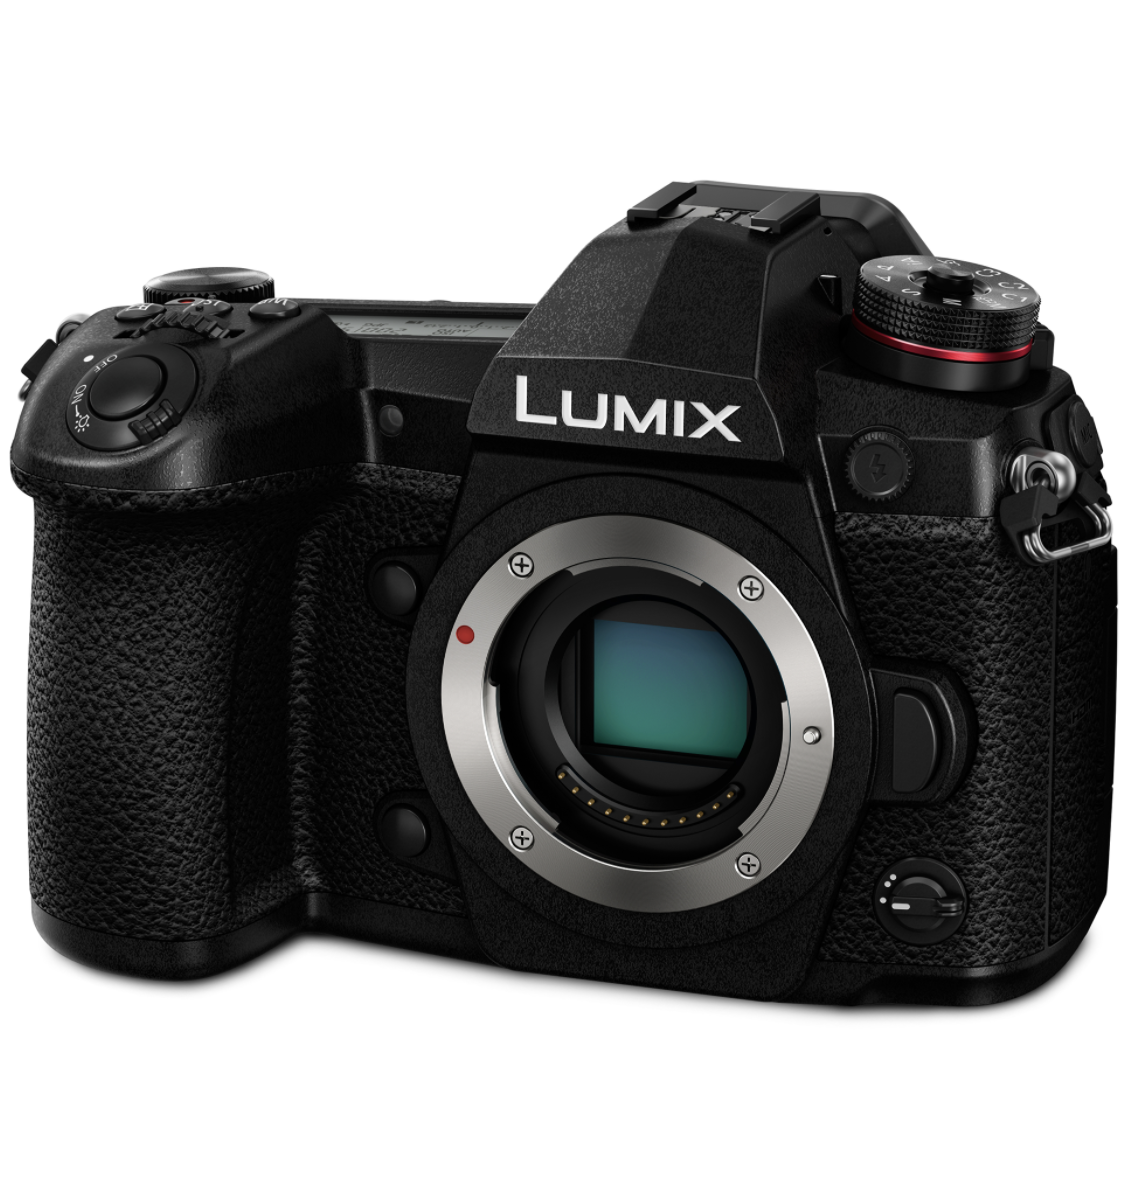 REVIEW: The Panasonic Lumix G9 - What More Could You Ask For?